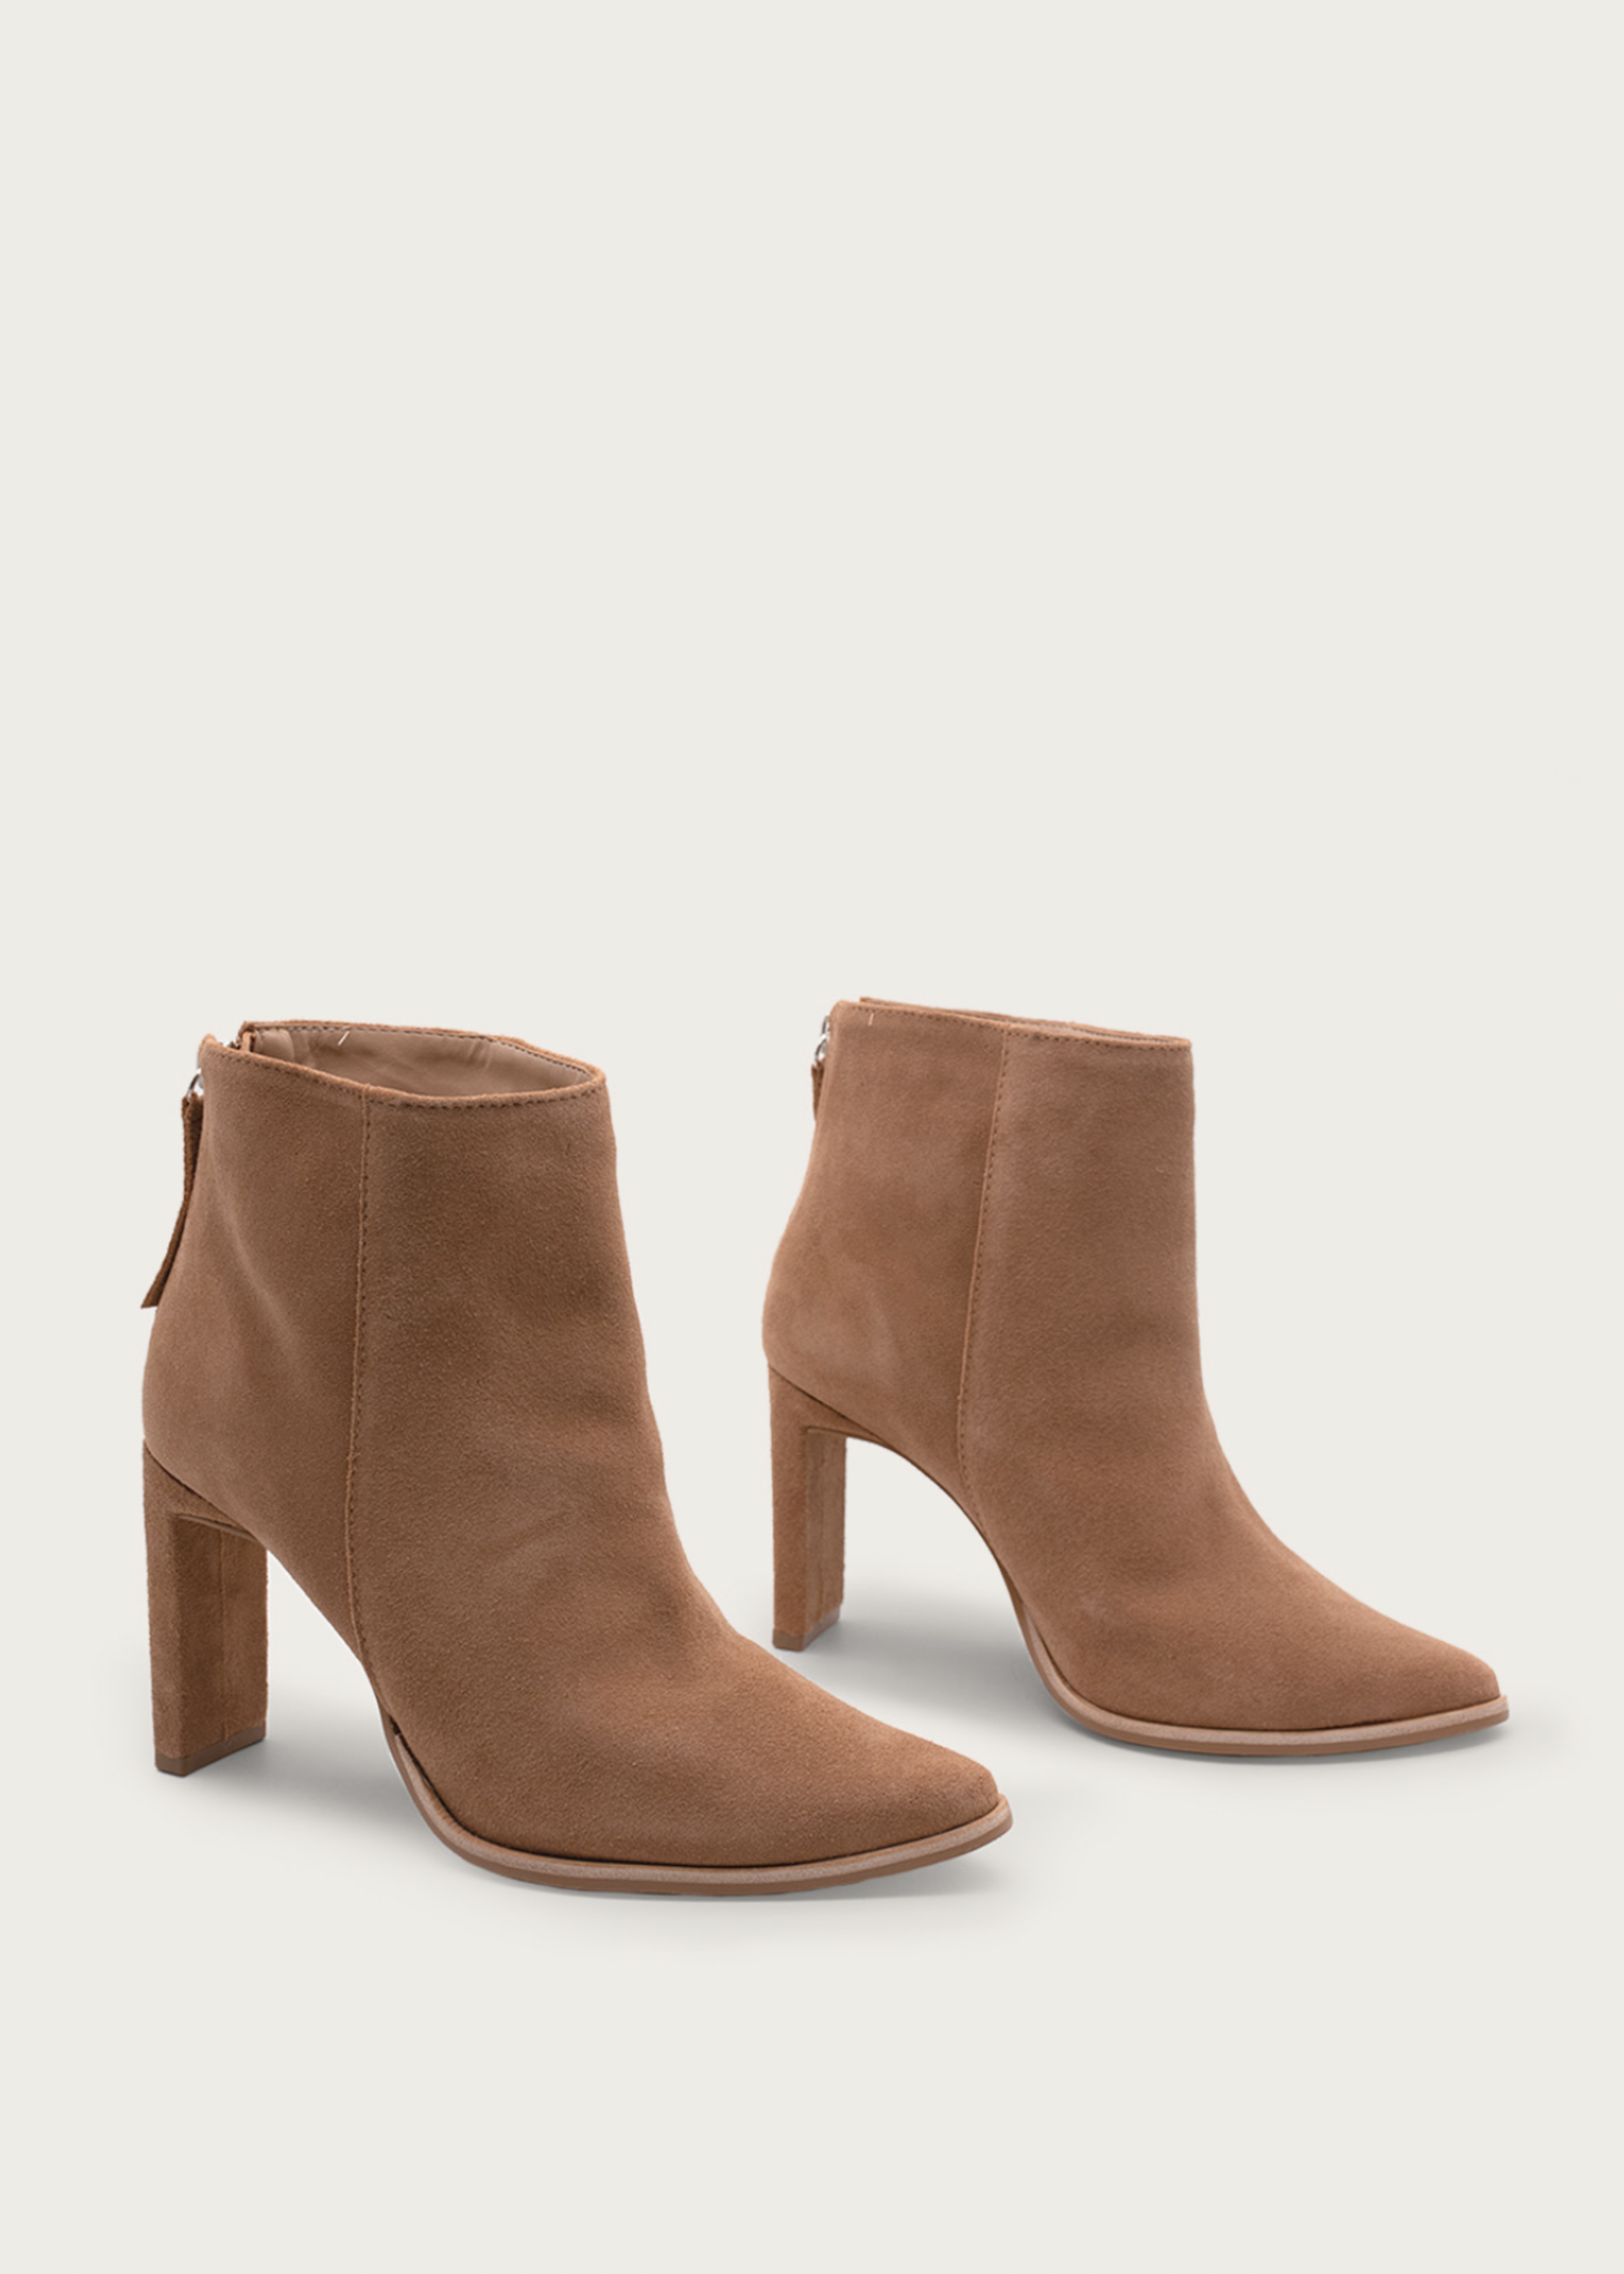 Elitaire Boutique Cologne Suede High Heeled Boot in Caramel